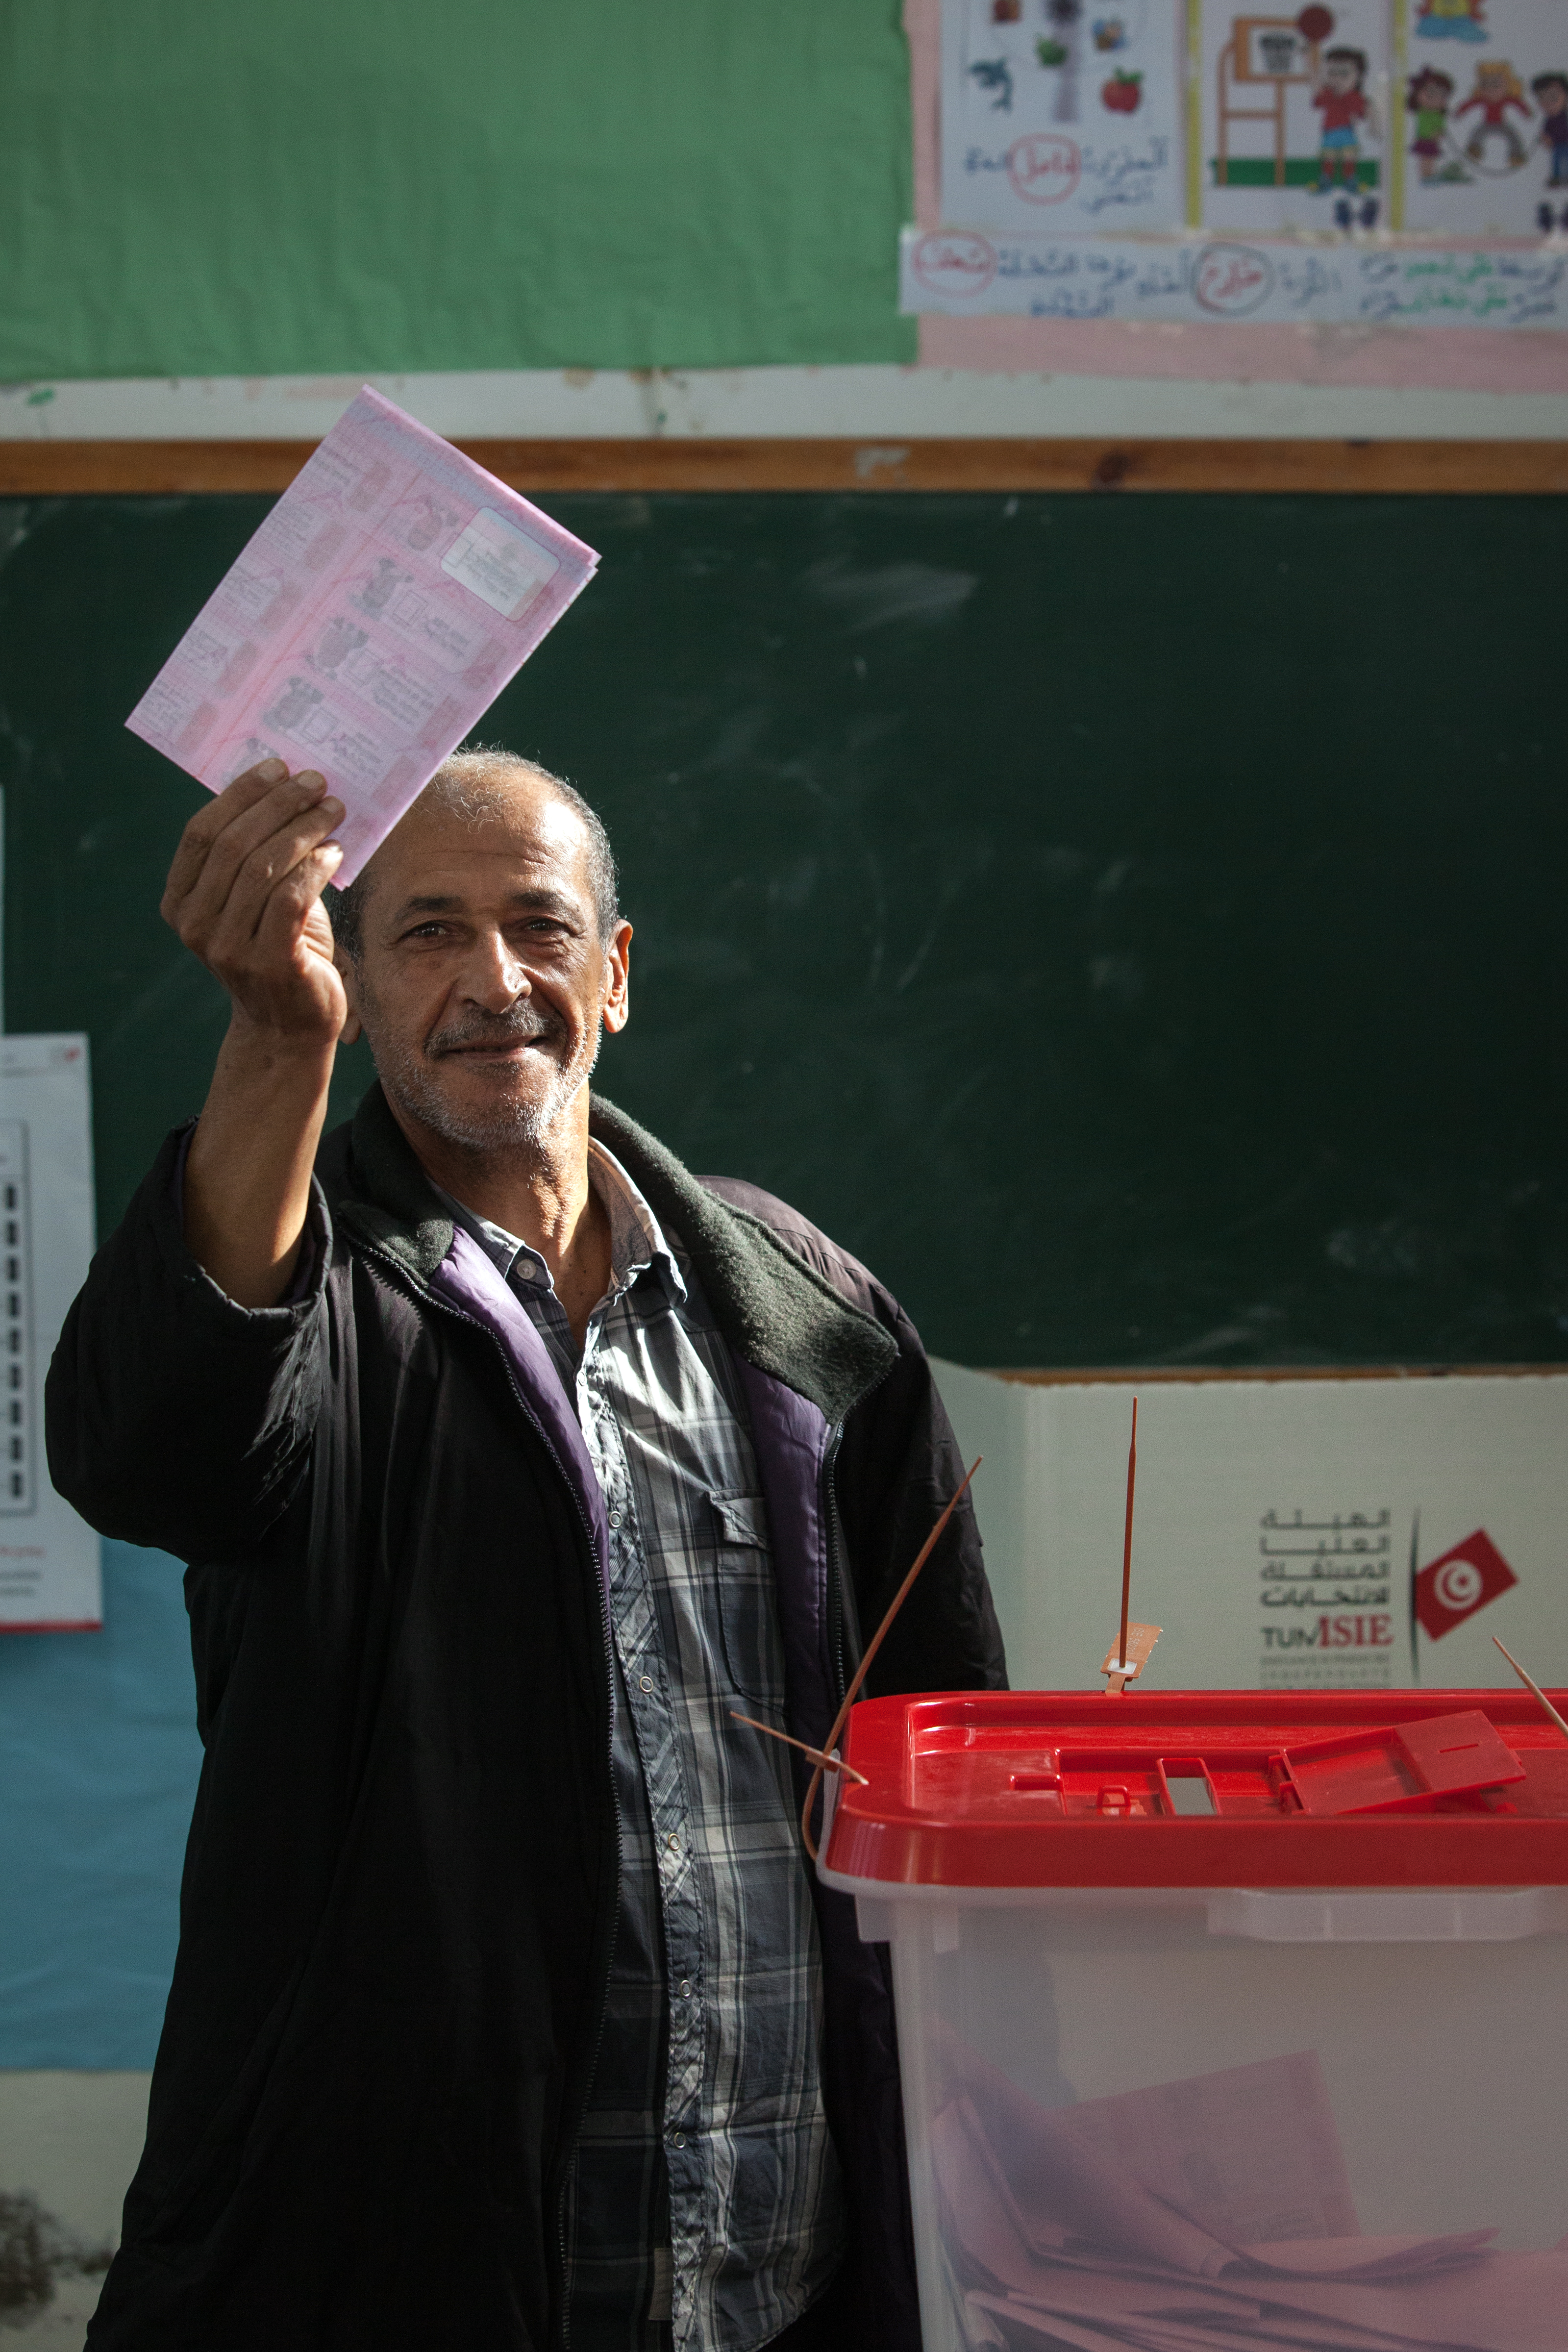 Tunisians came to the polls to exercise their right to vote in the first presidential election since the Arab Spring revolution. 